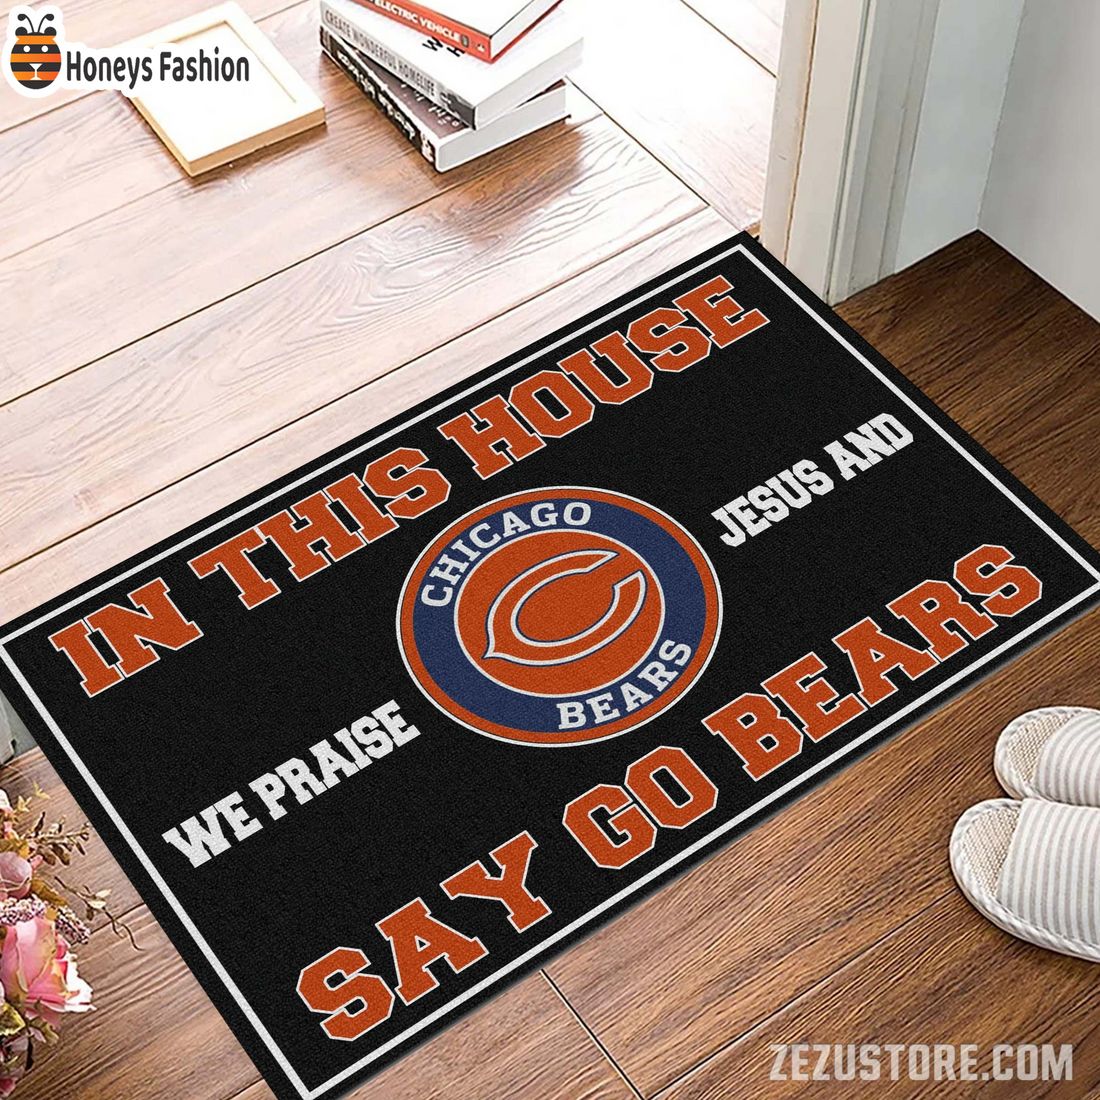 In this house we praise jesus and say go Bears doormat